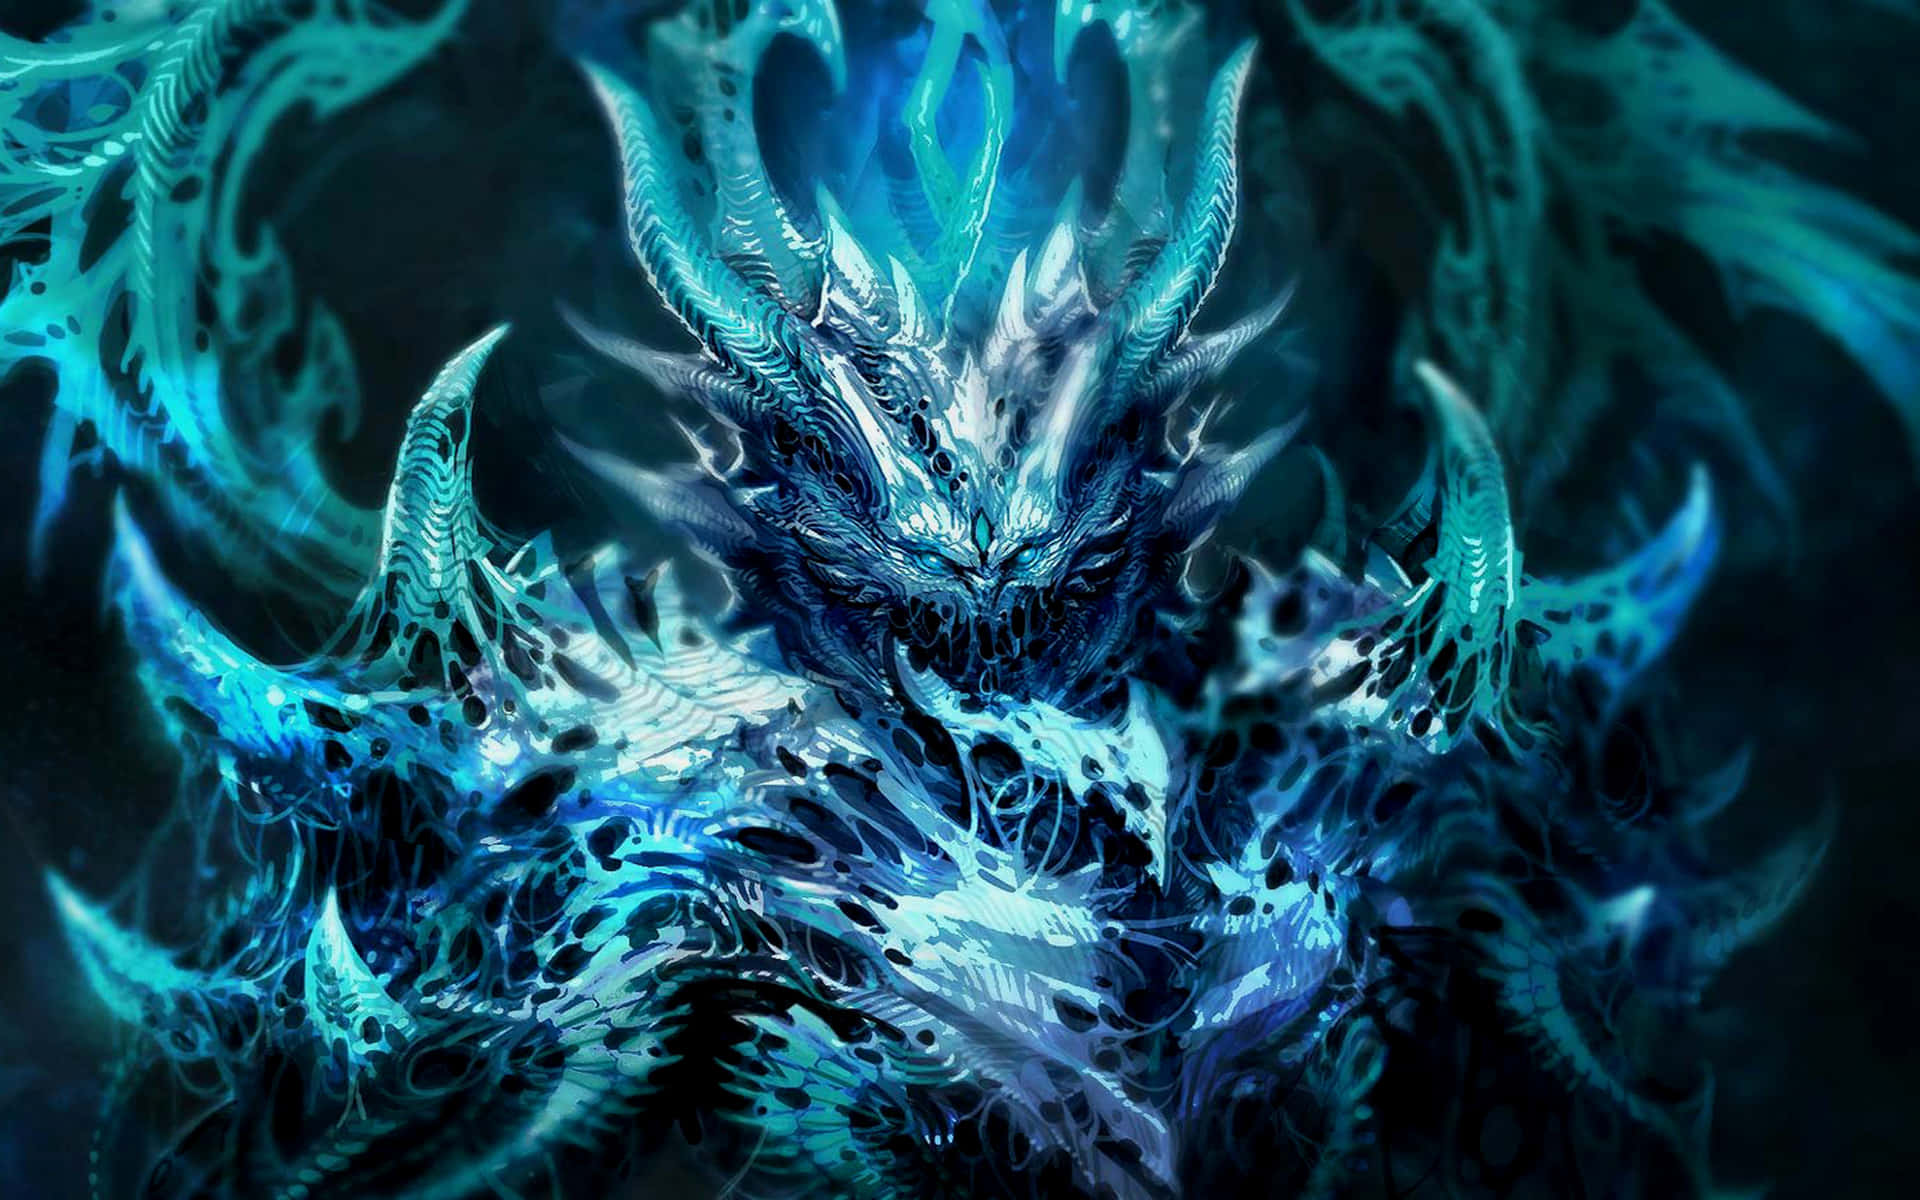 Unleash the cool monster to dominate the battlefield. Wallpaper